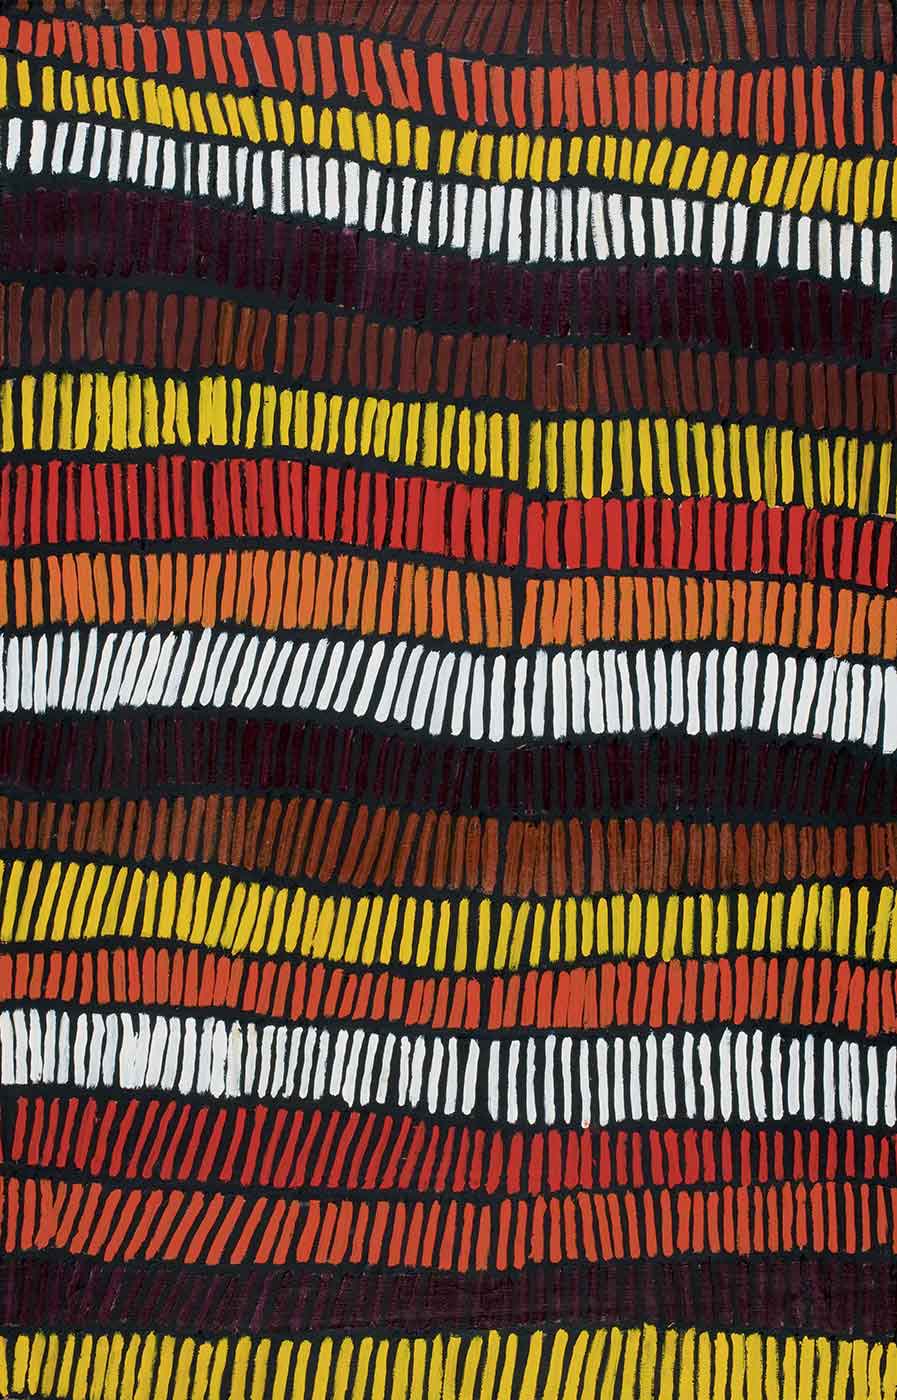 A painting on brown linen with horizontal rows of vertical strokes in yellow, brown, burgundy, orange, red and white on a black background. - click to view larger image